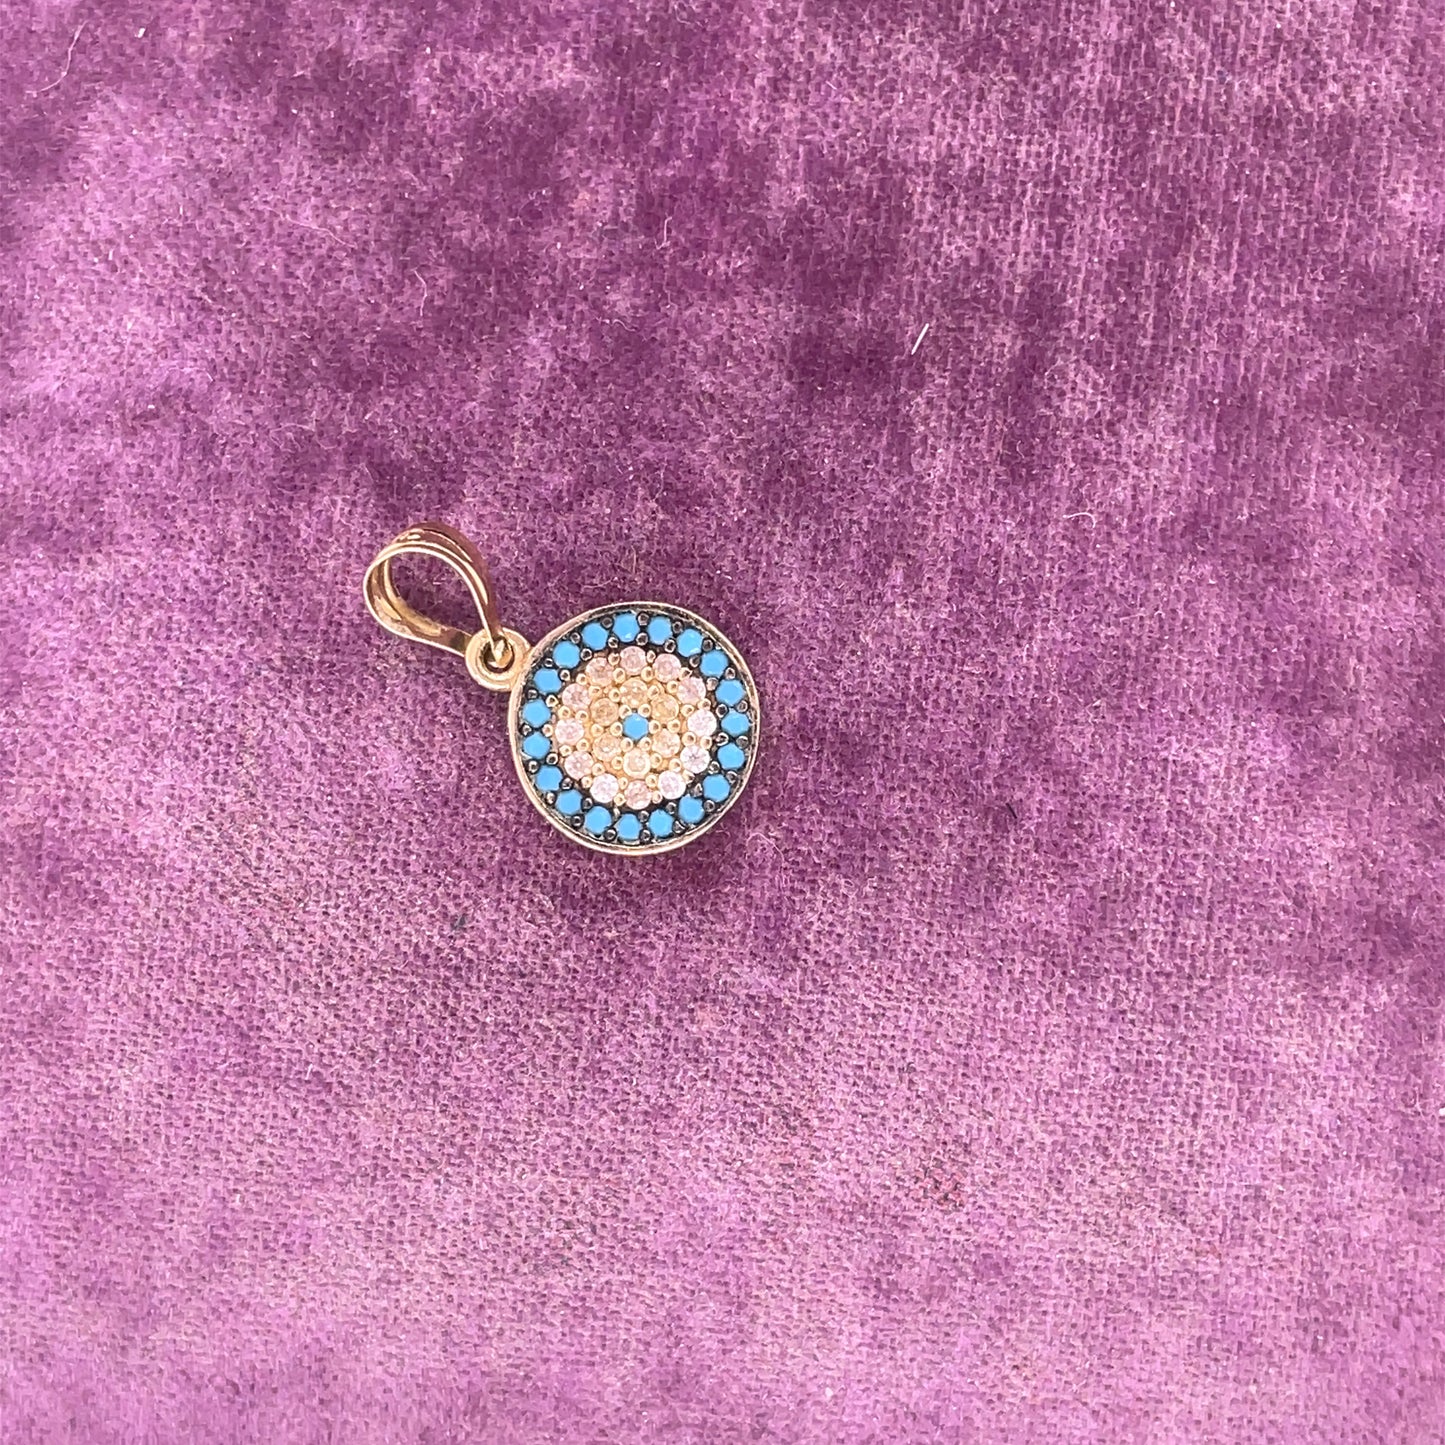 Vintage 14K Yellow Gold Double Sided Evil Eye Pendant w/ Sapphires, Turquoise and Diamond